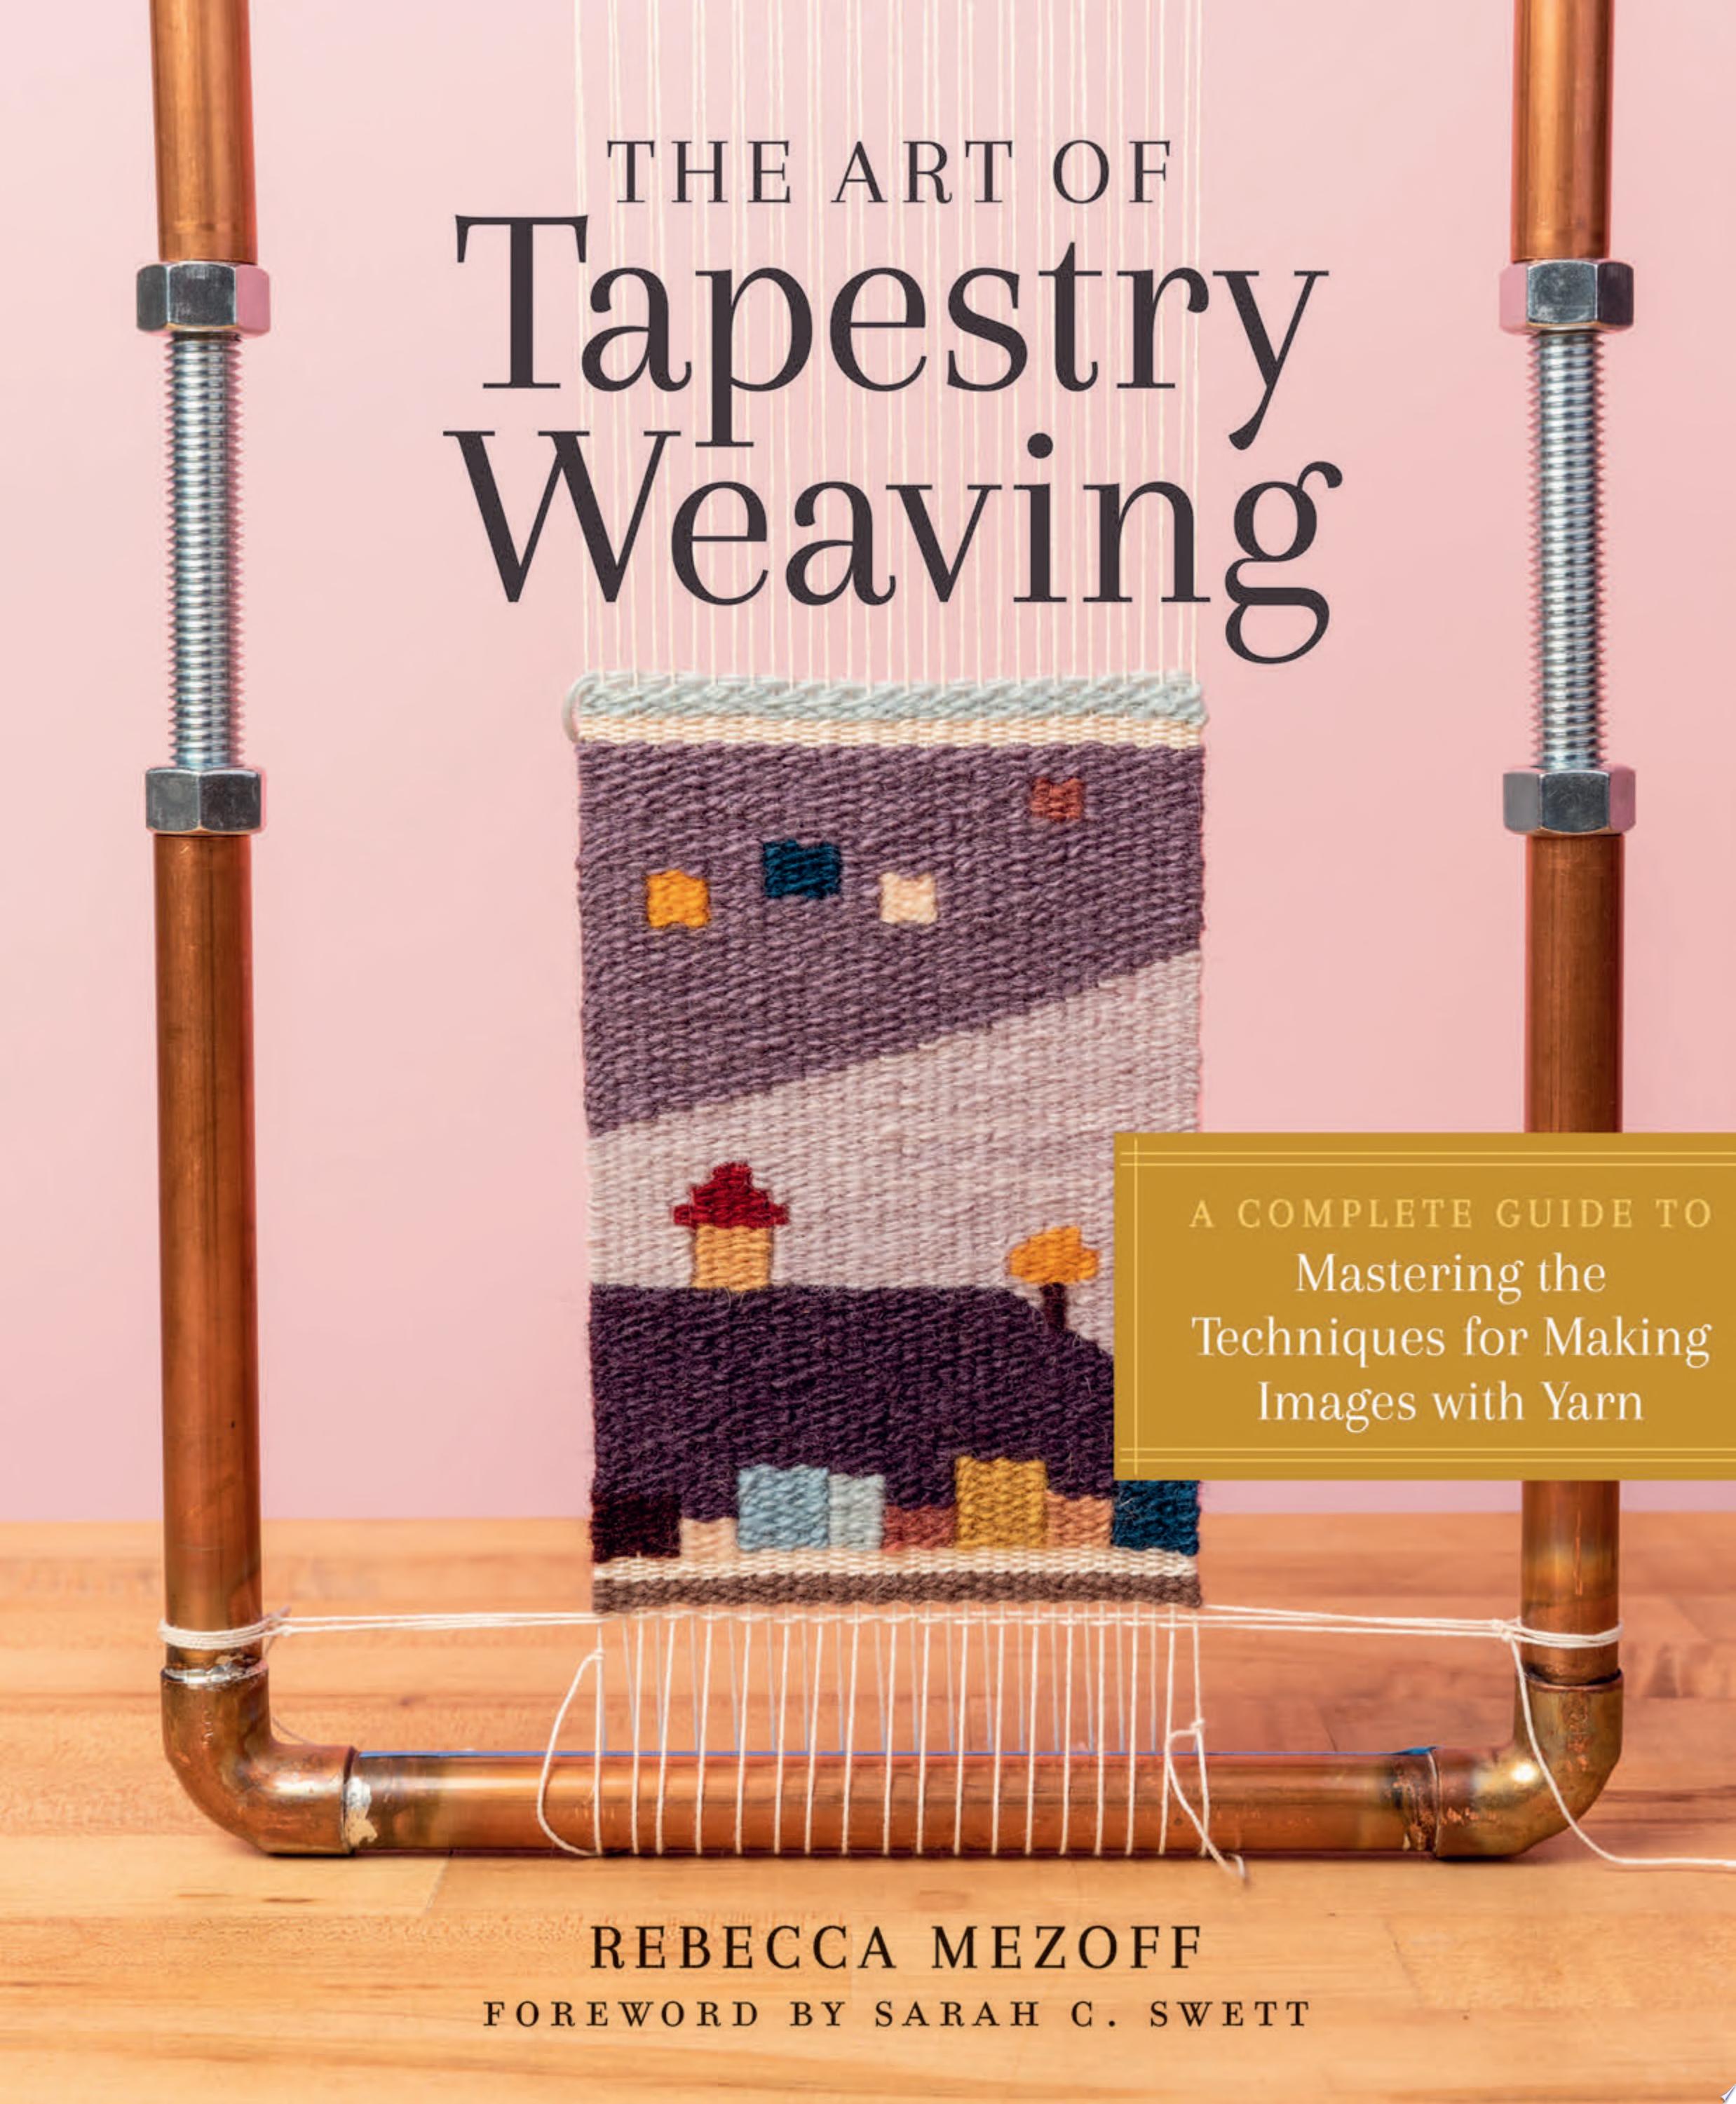 Image for "The Art of Tapestry Weaving"